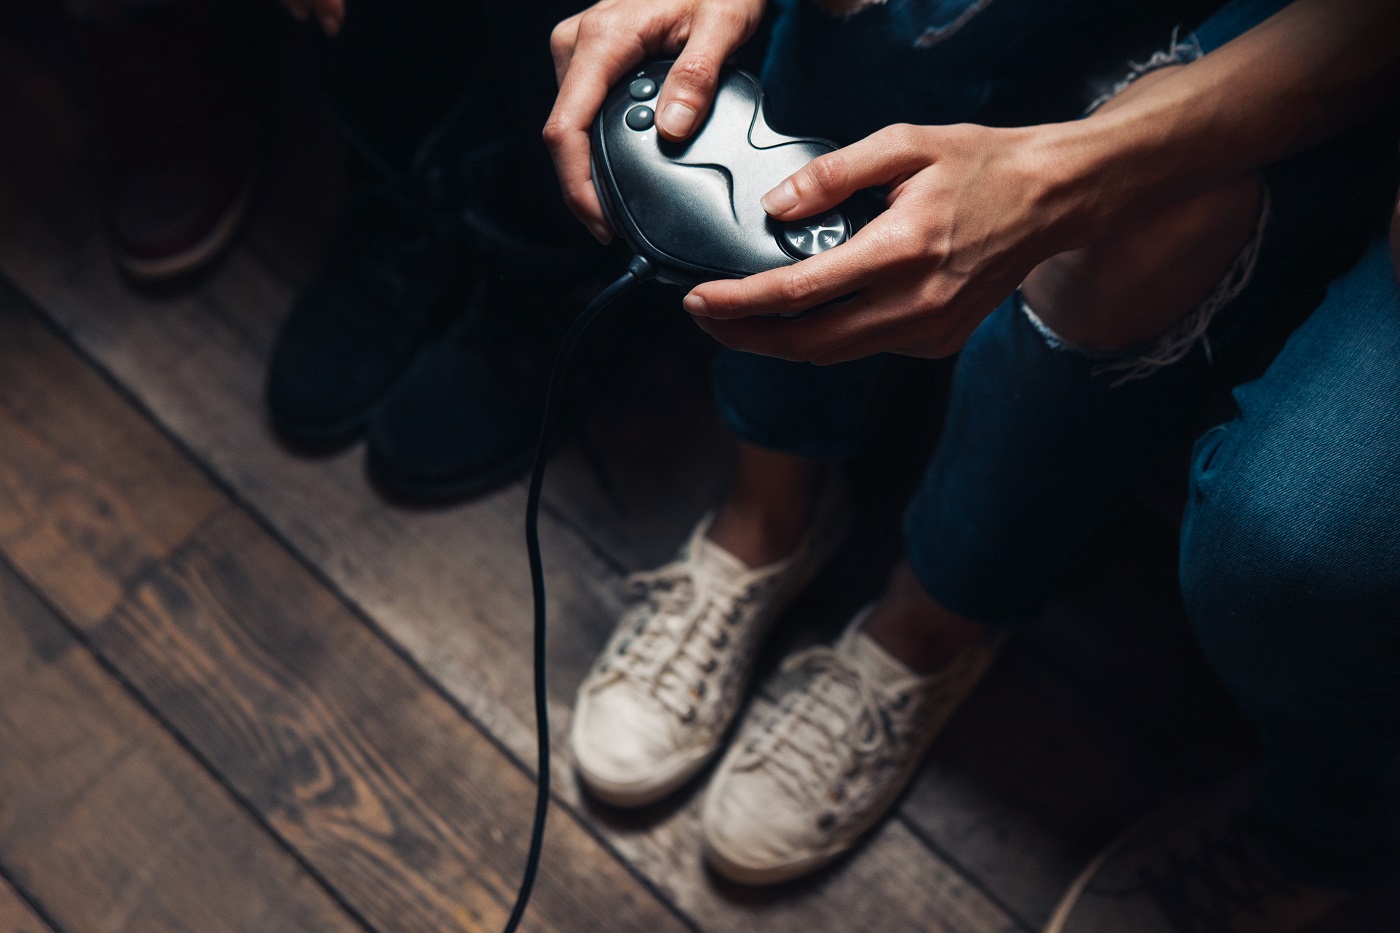 Playing 'shooter' video games can damage brain